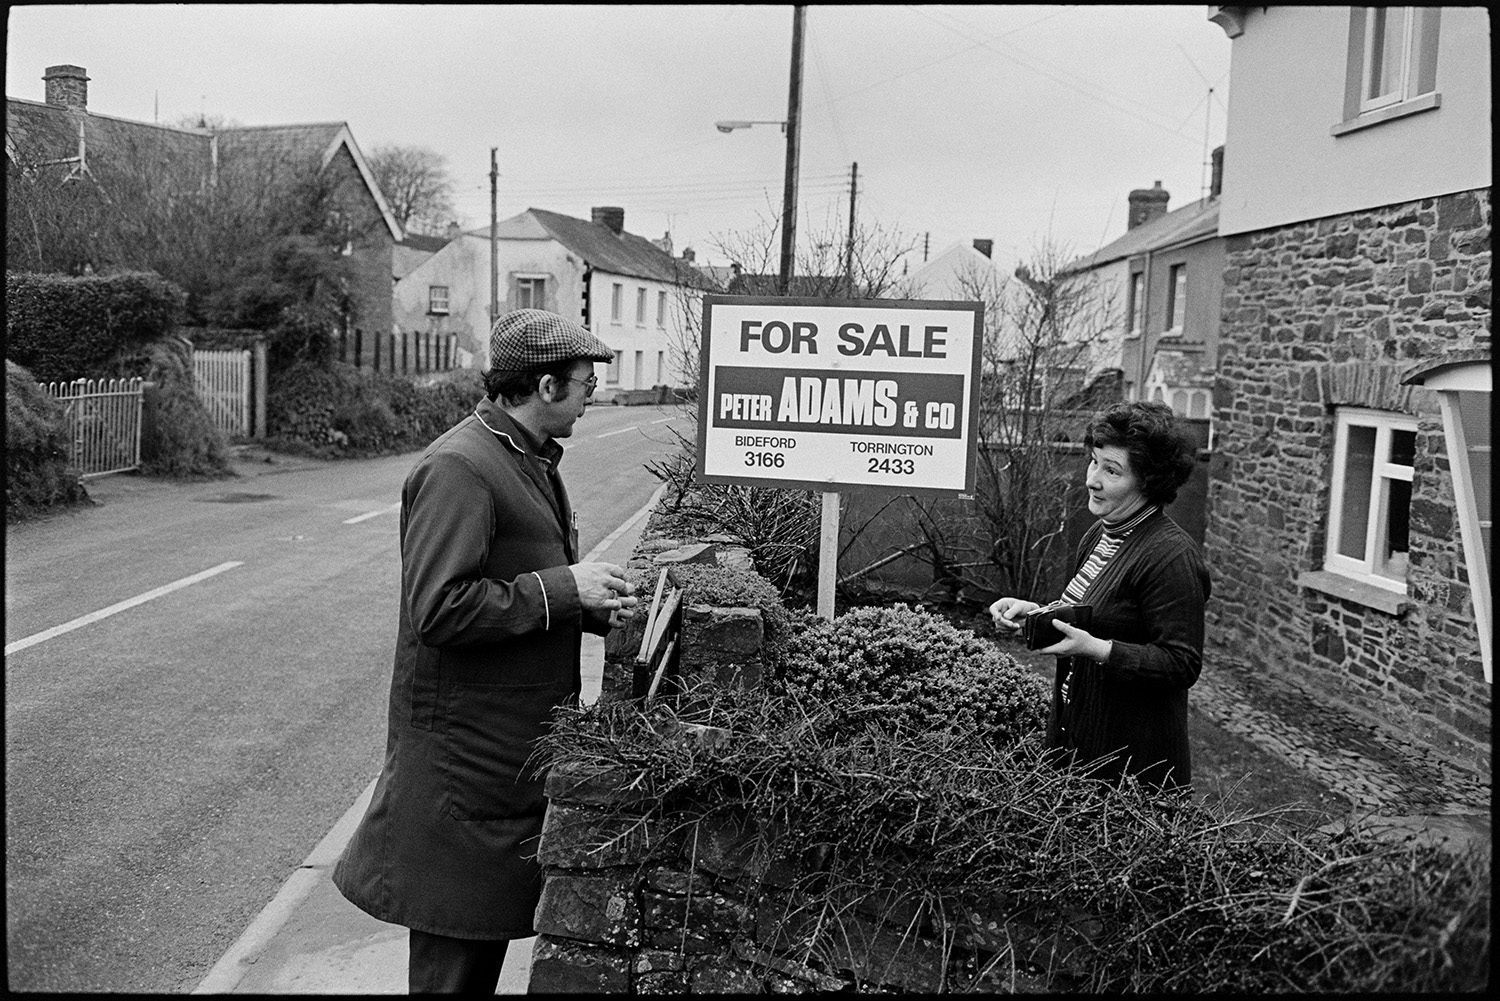 Farmer, milkman doing last milk round, showing new man the ropes, milk bottles.
[A woman standing in the front garden of her house in Beaford paying a milkman who is standing on the pavement at the front gate. A Peter Adams & Co for sale sign is in the front garden. Other houses can be seen in the street in the background.]